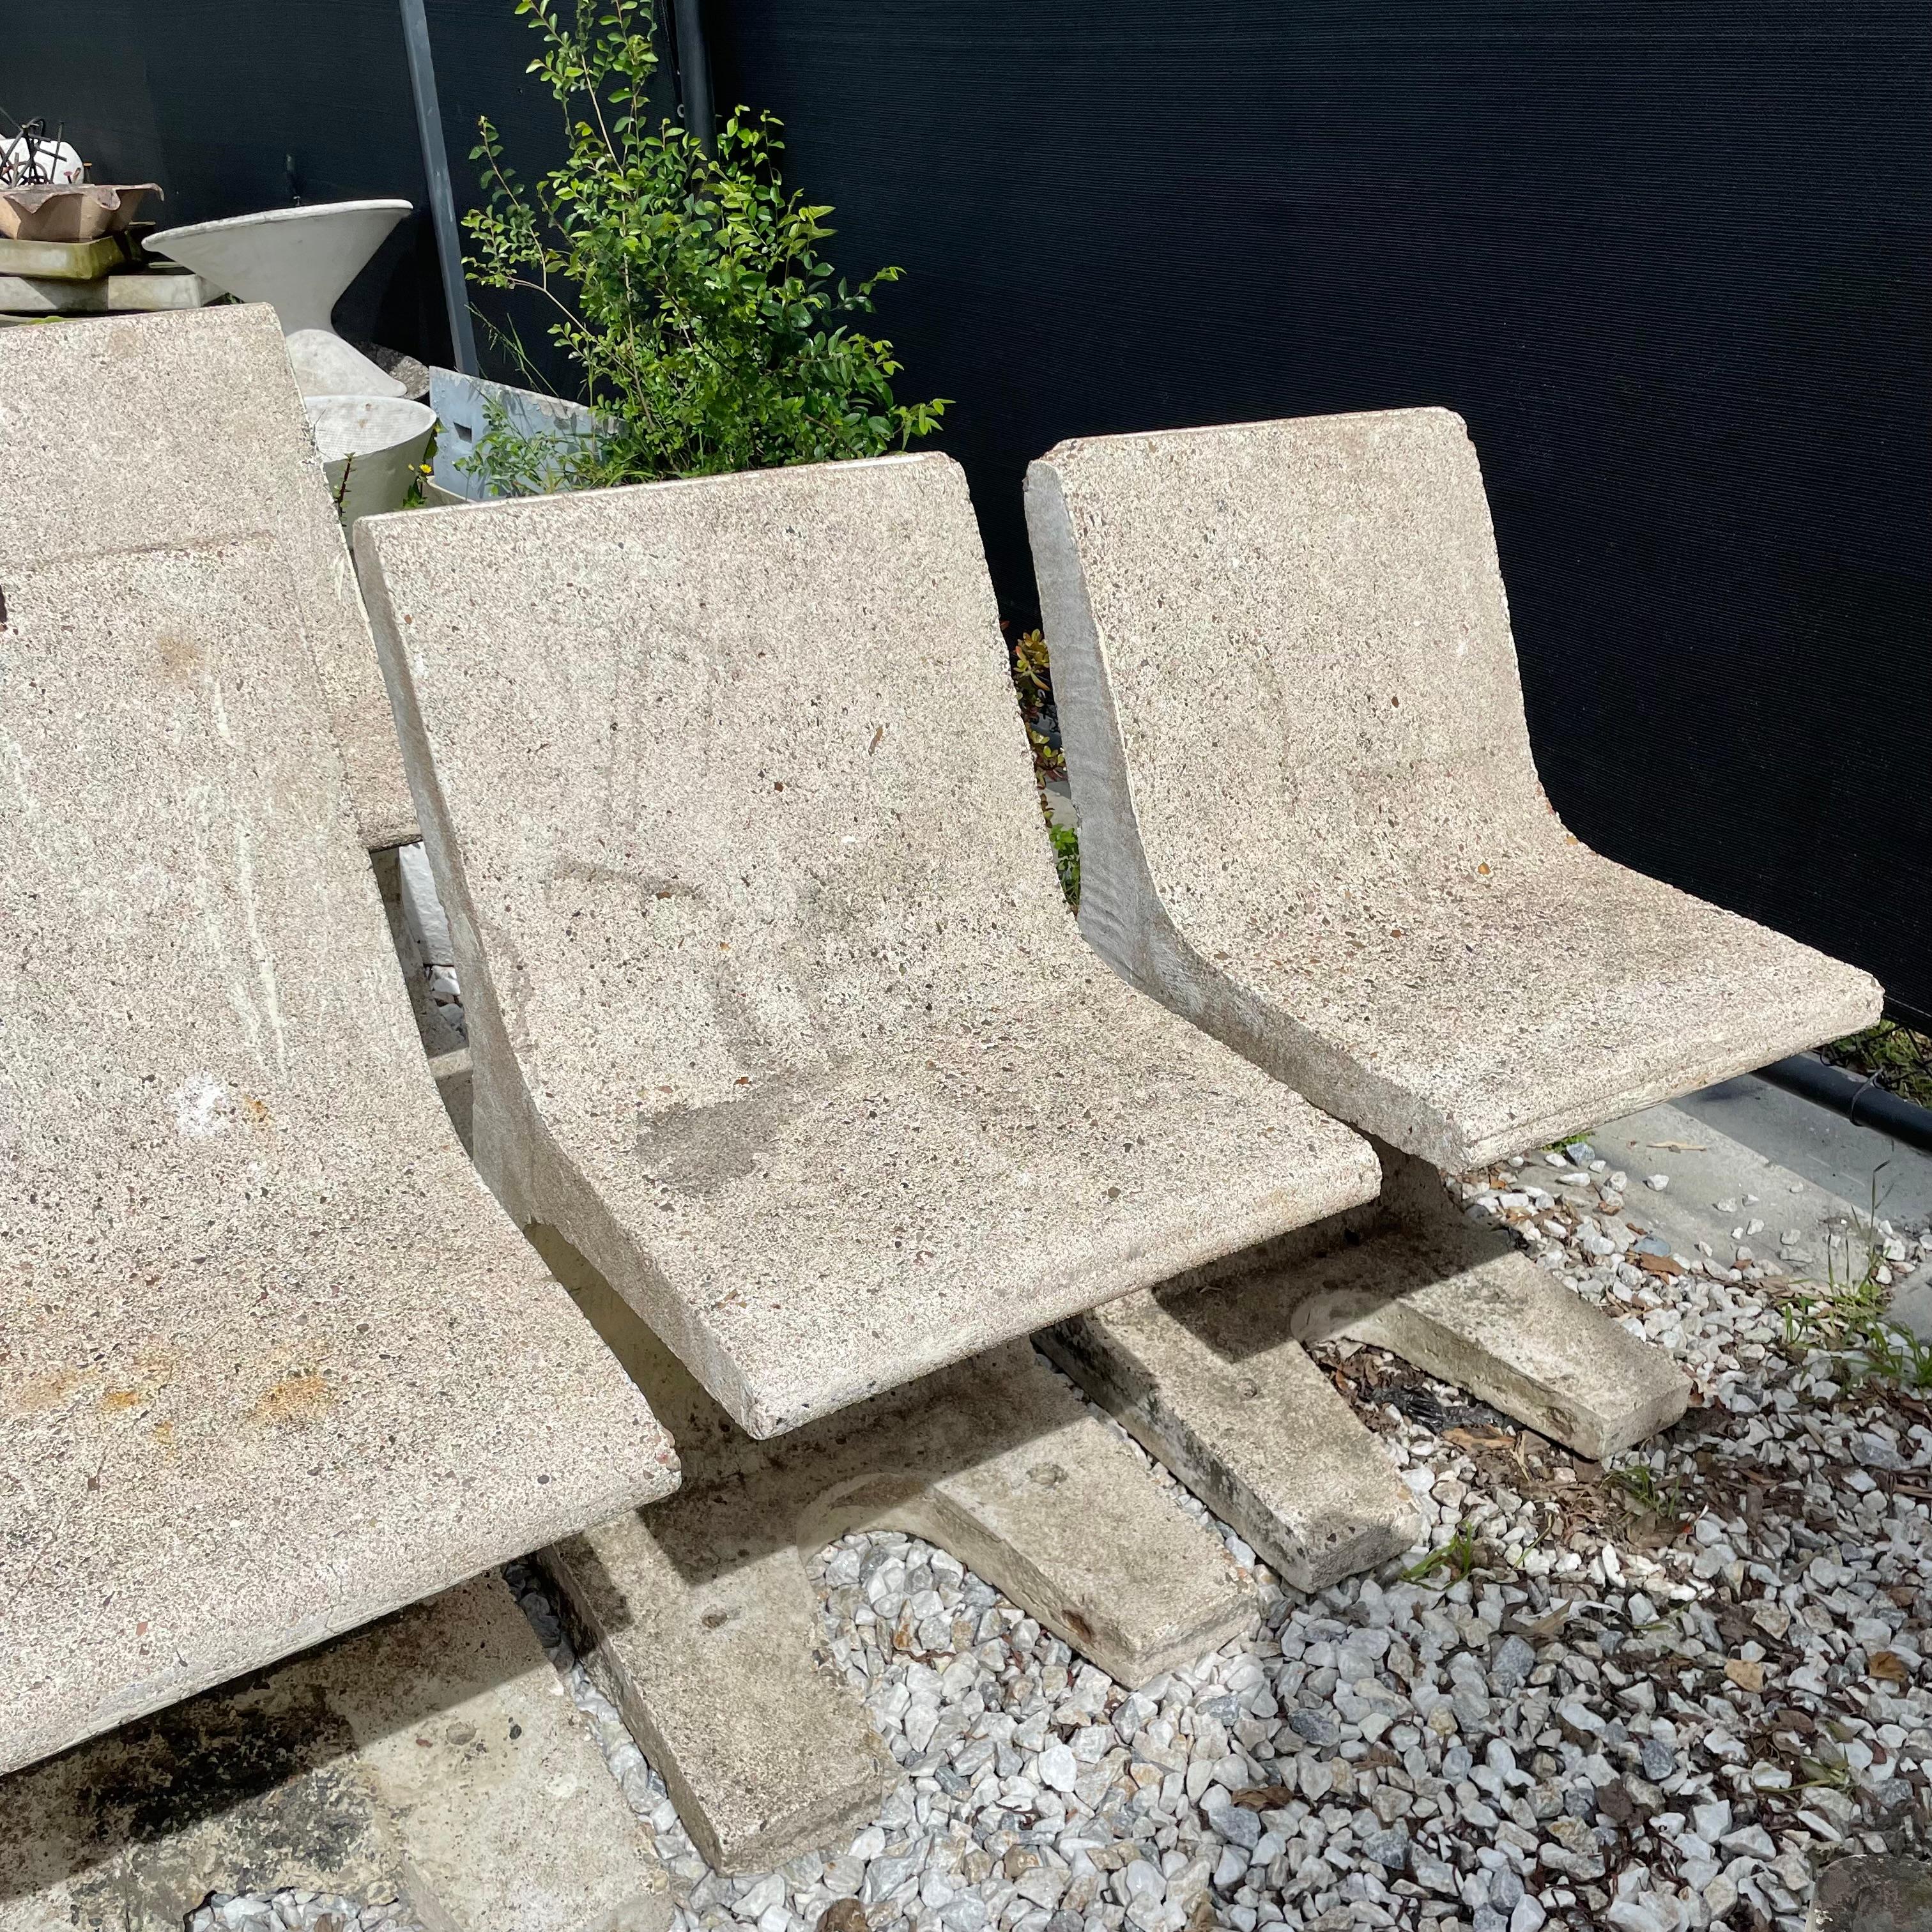 Monumental Concrete Sculptural Chairs, 1970s, France In Good Condition For Sale In Los Angeles, CA